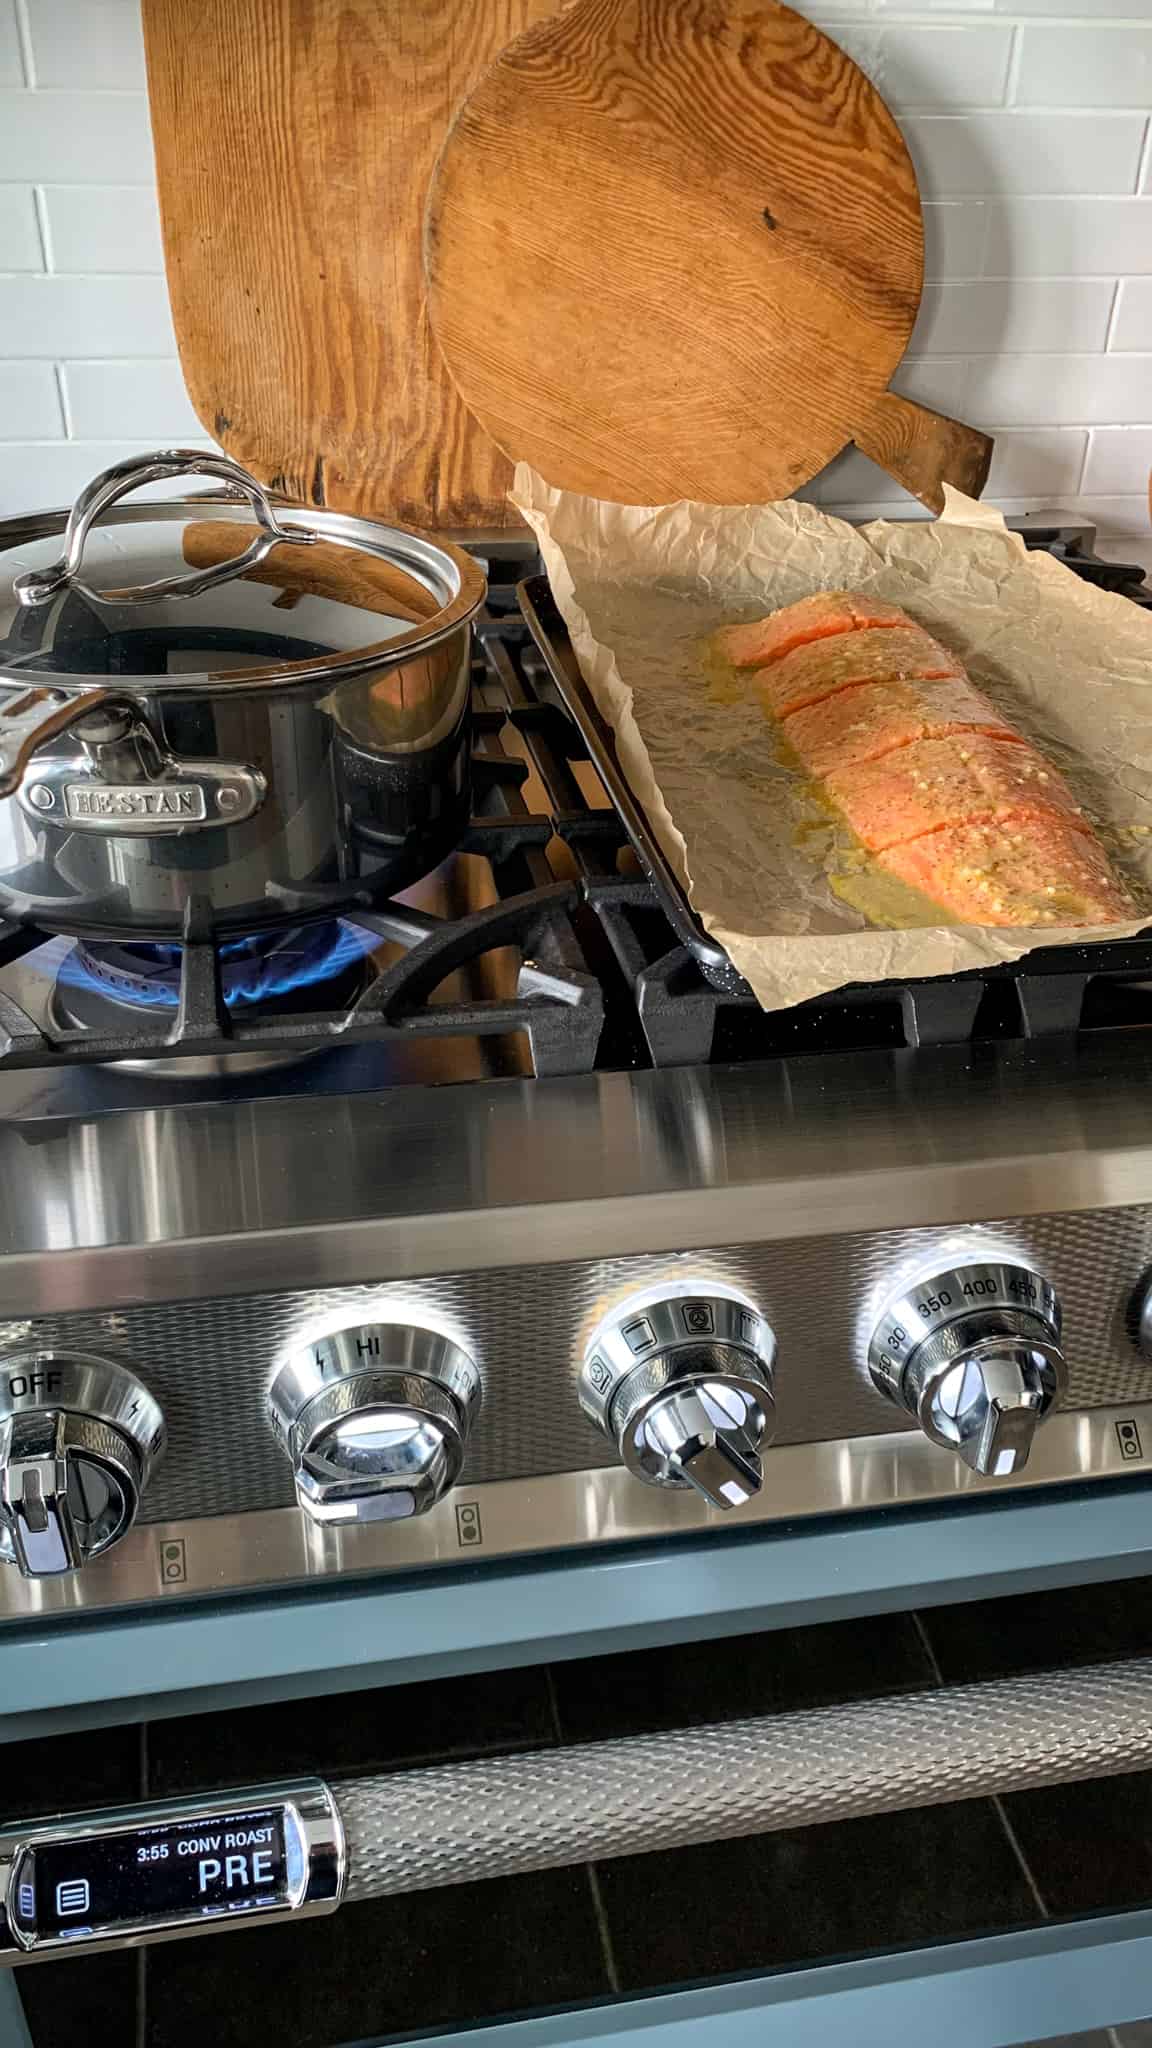 On the top of a range is a pot boiling potatoes and a sheet pan with a portioned coho salmon ready to get roasted. 